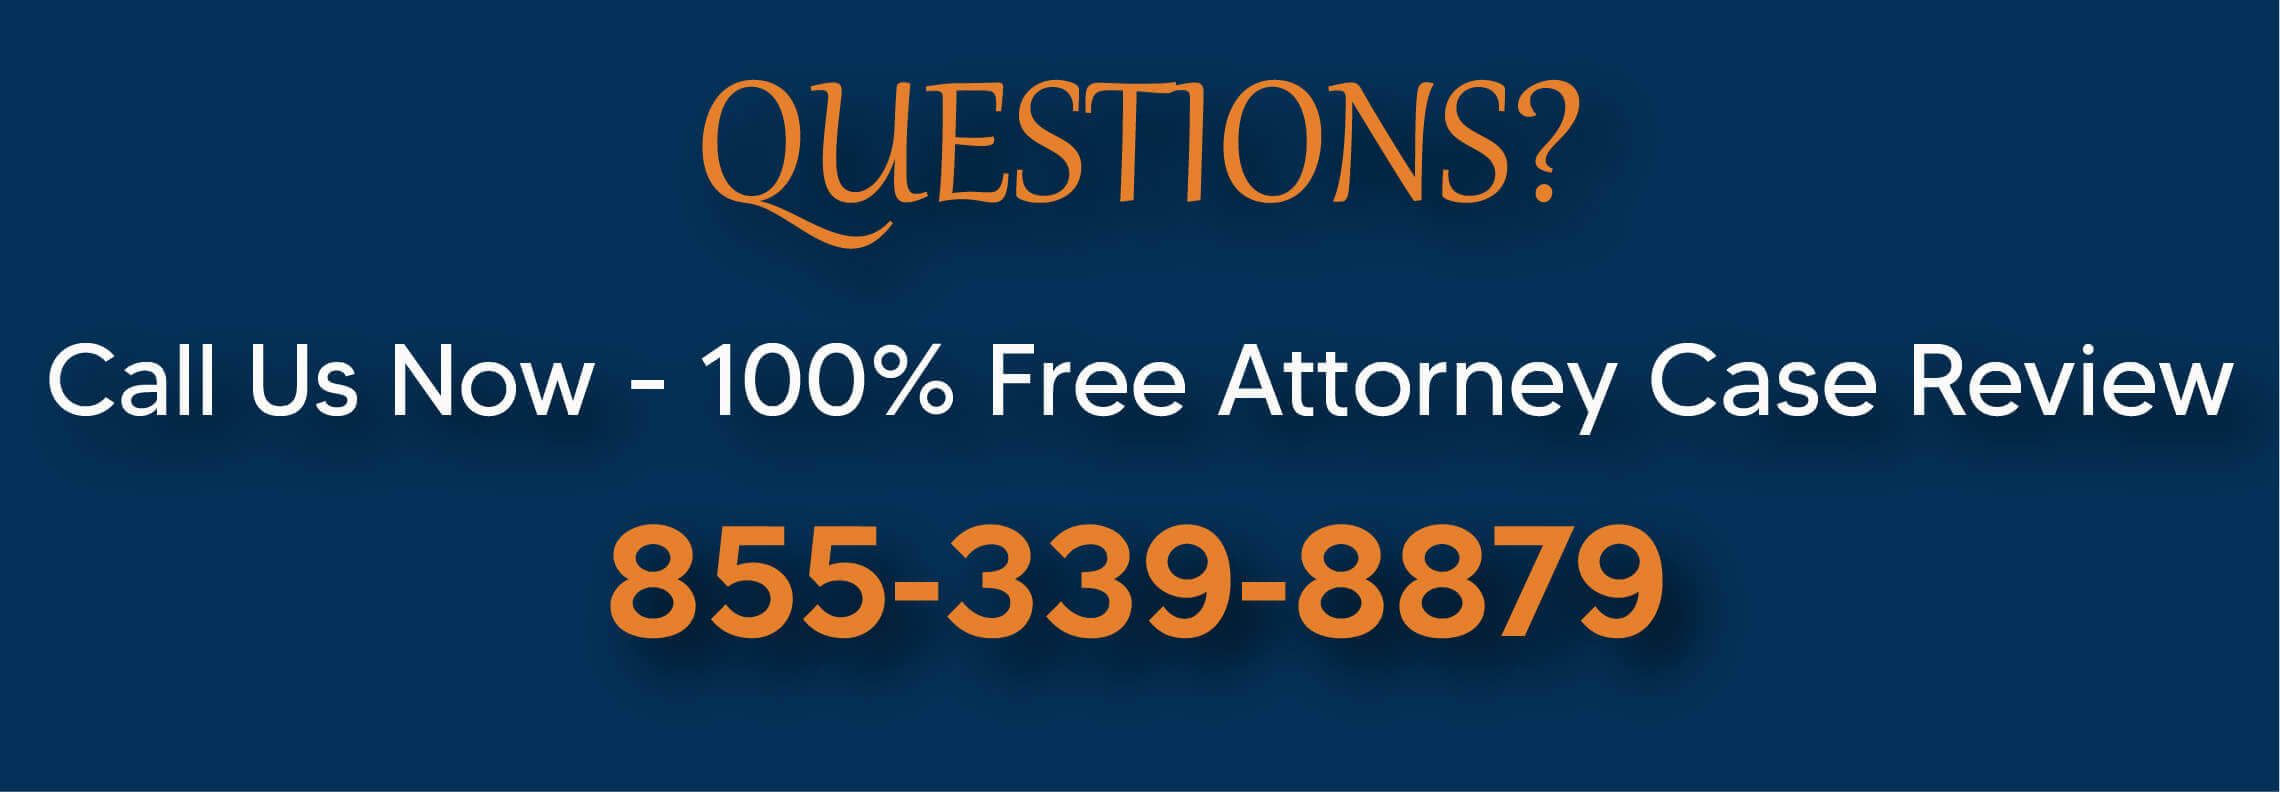 Where to turn when you are charged with Domestic Violence lawsuit sue information help inquire lawyer attorney law